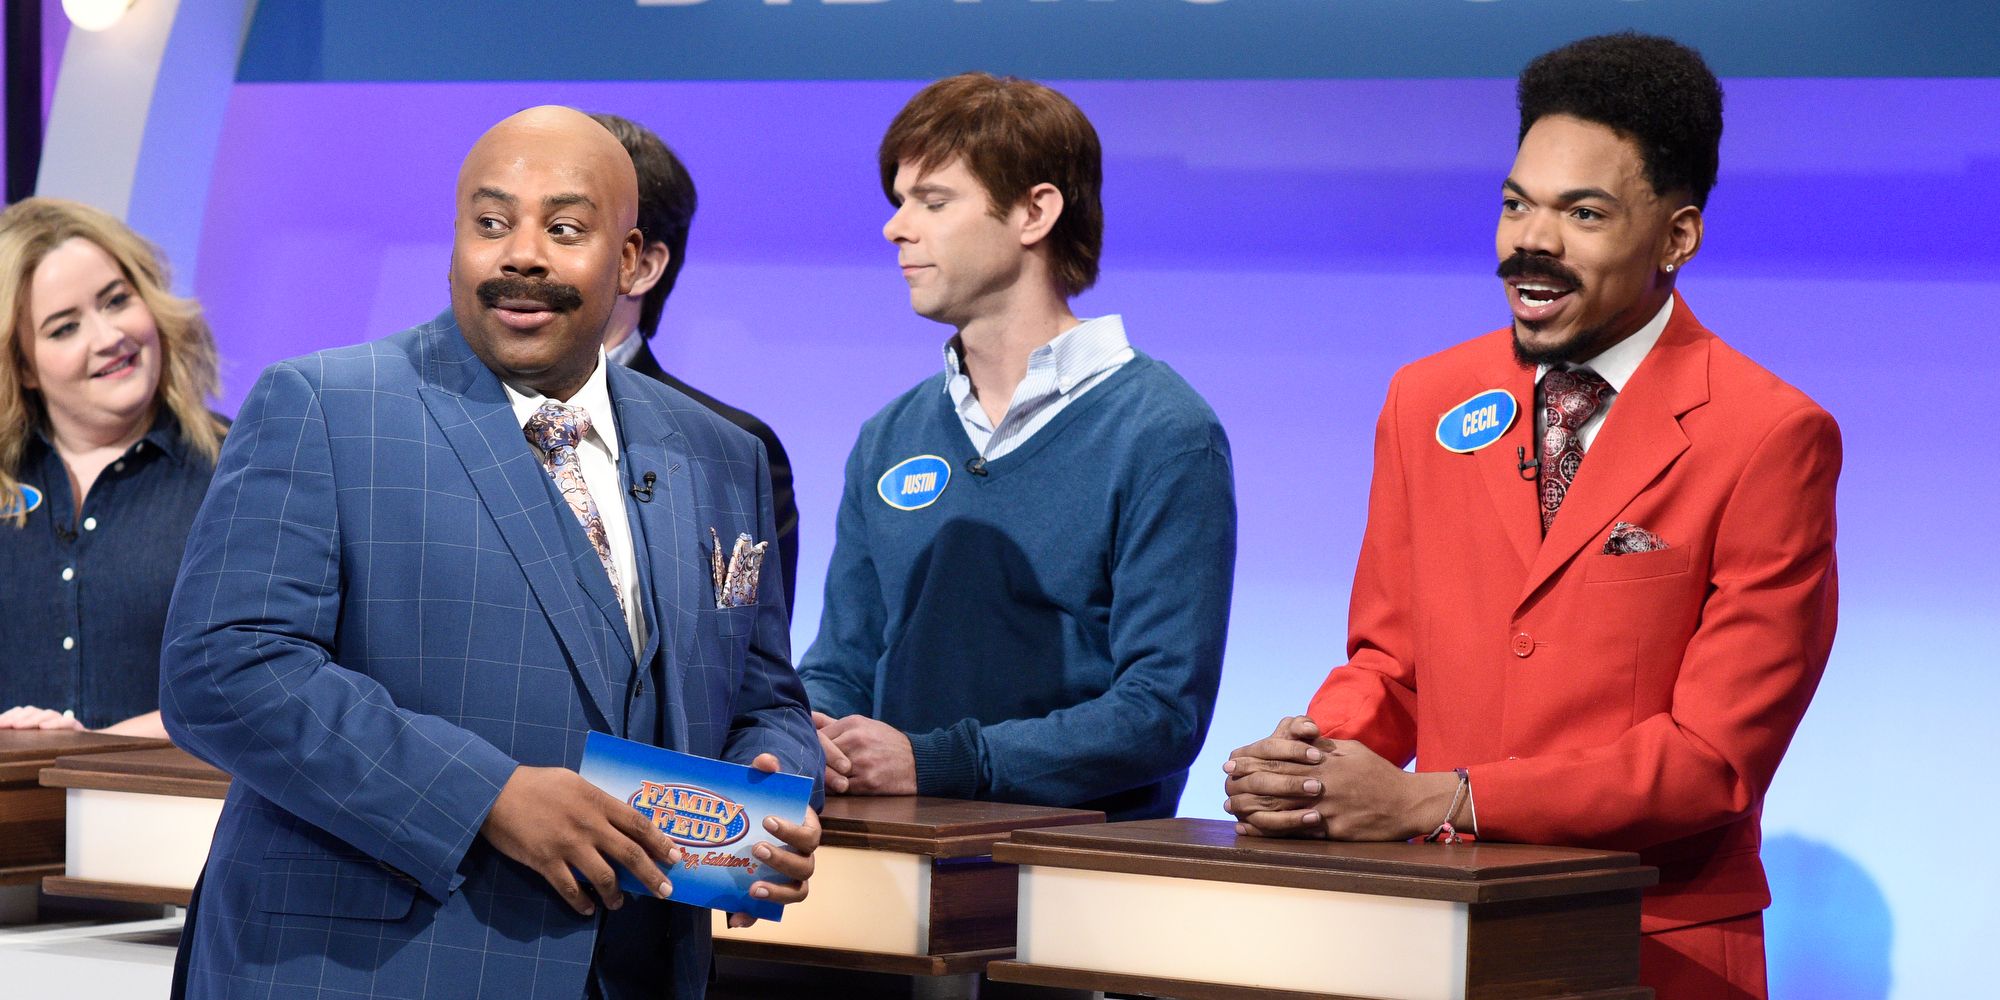 Kenan as Steve Harvey talking to Chance the Rapper as Cecil and his family, Aidy Bryant, Mikey Day, and Beck Bennett